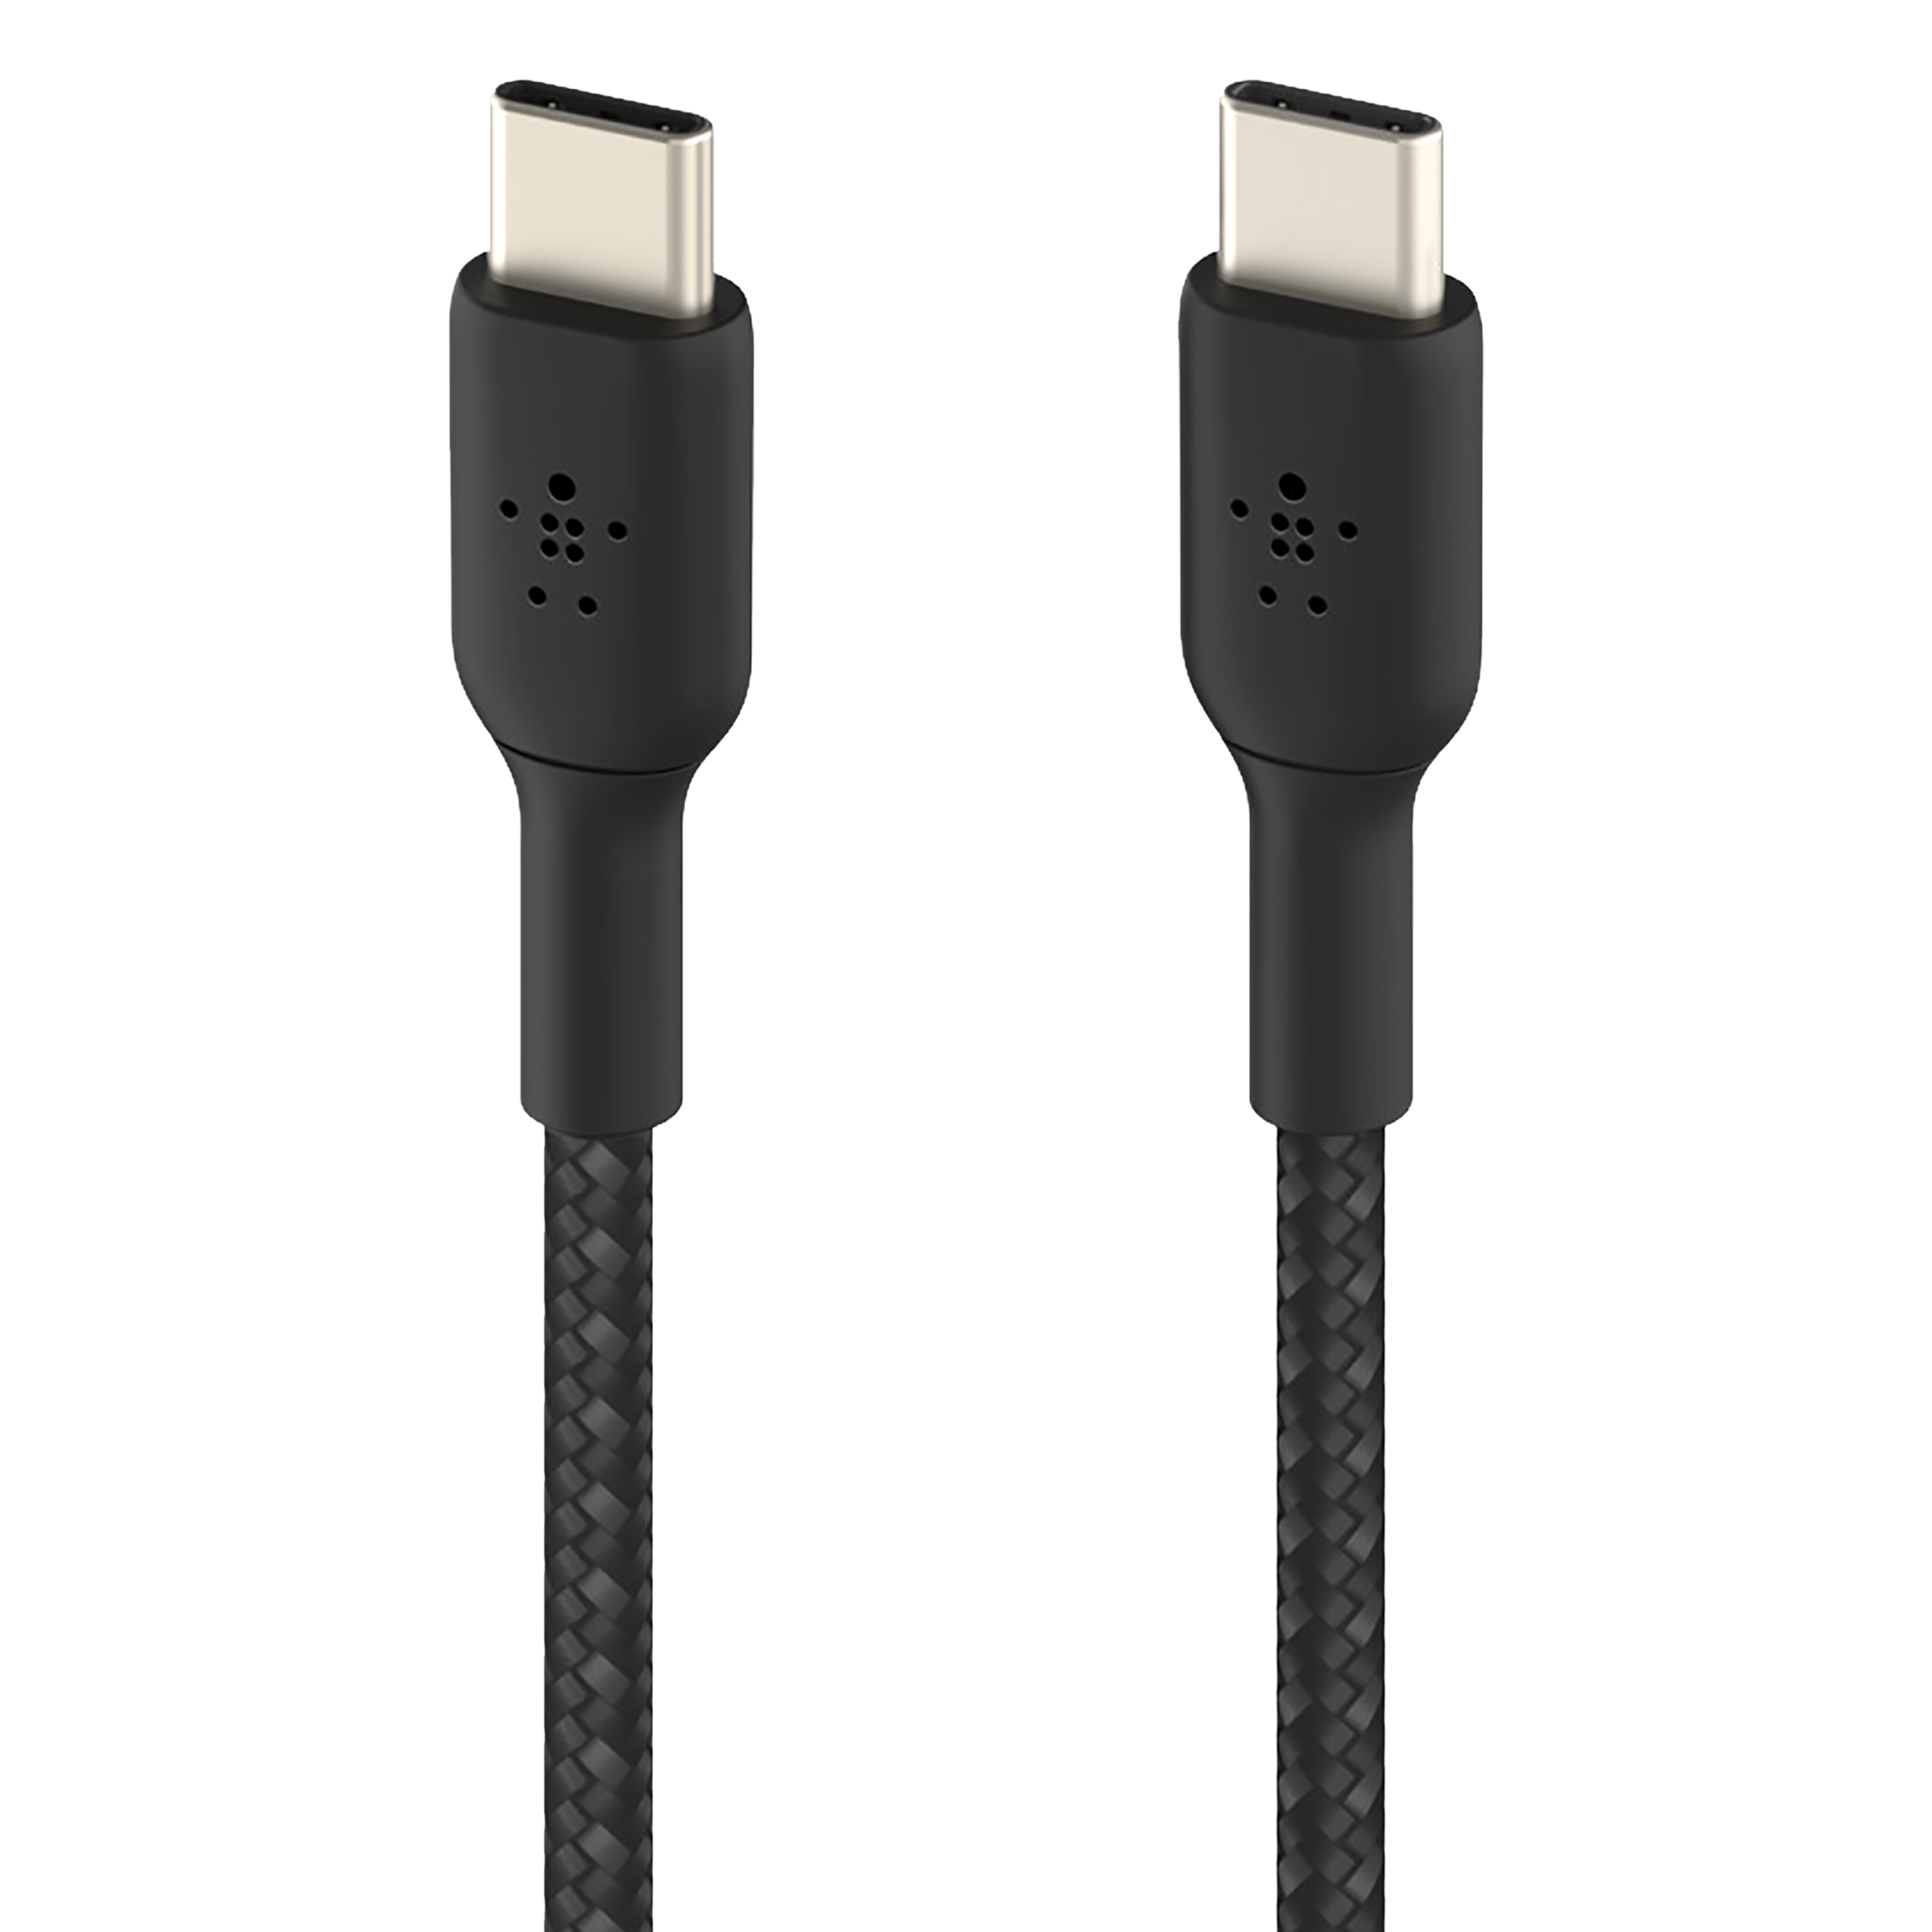 Belkin USB-C Home Charger + USB-C to USB-C Cable